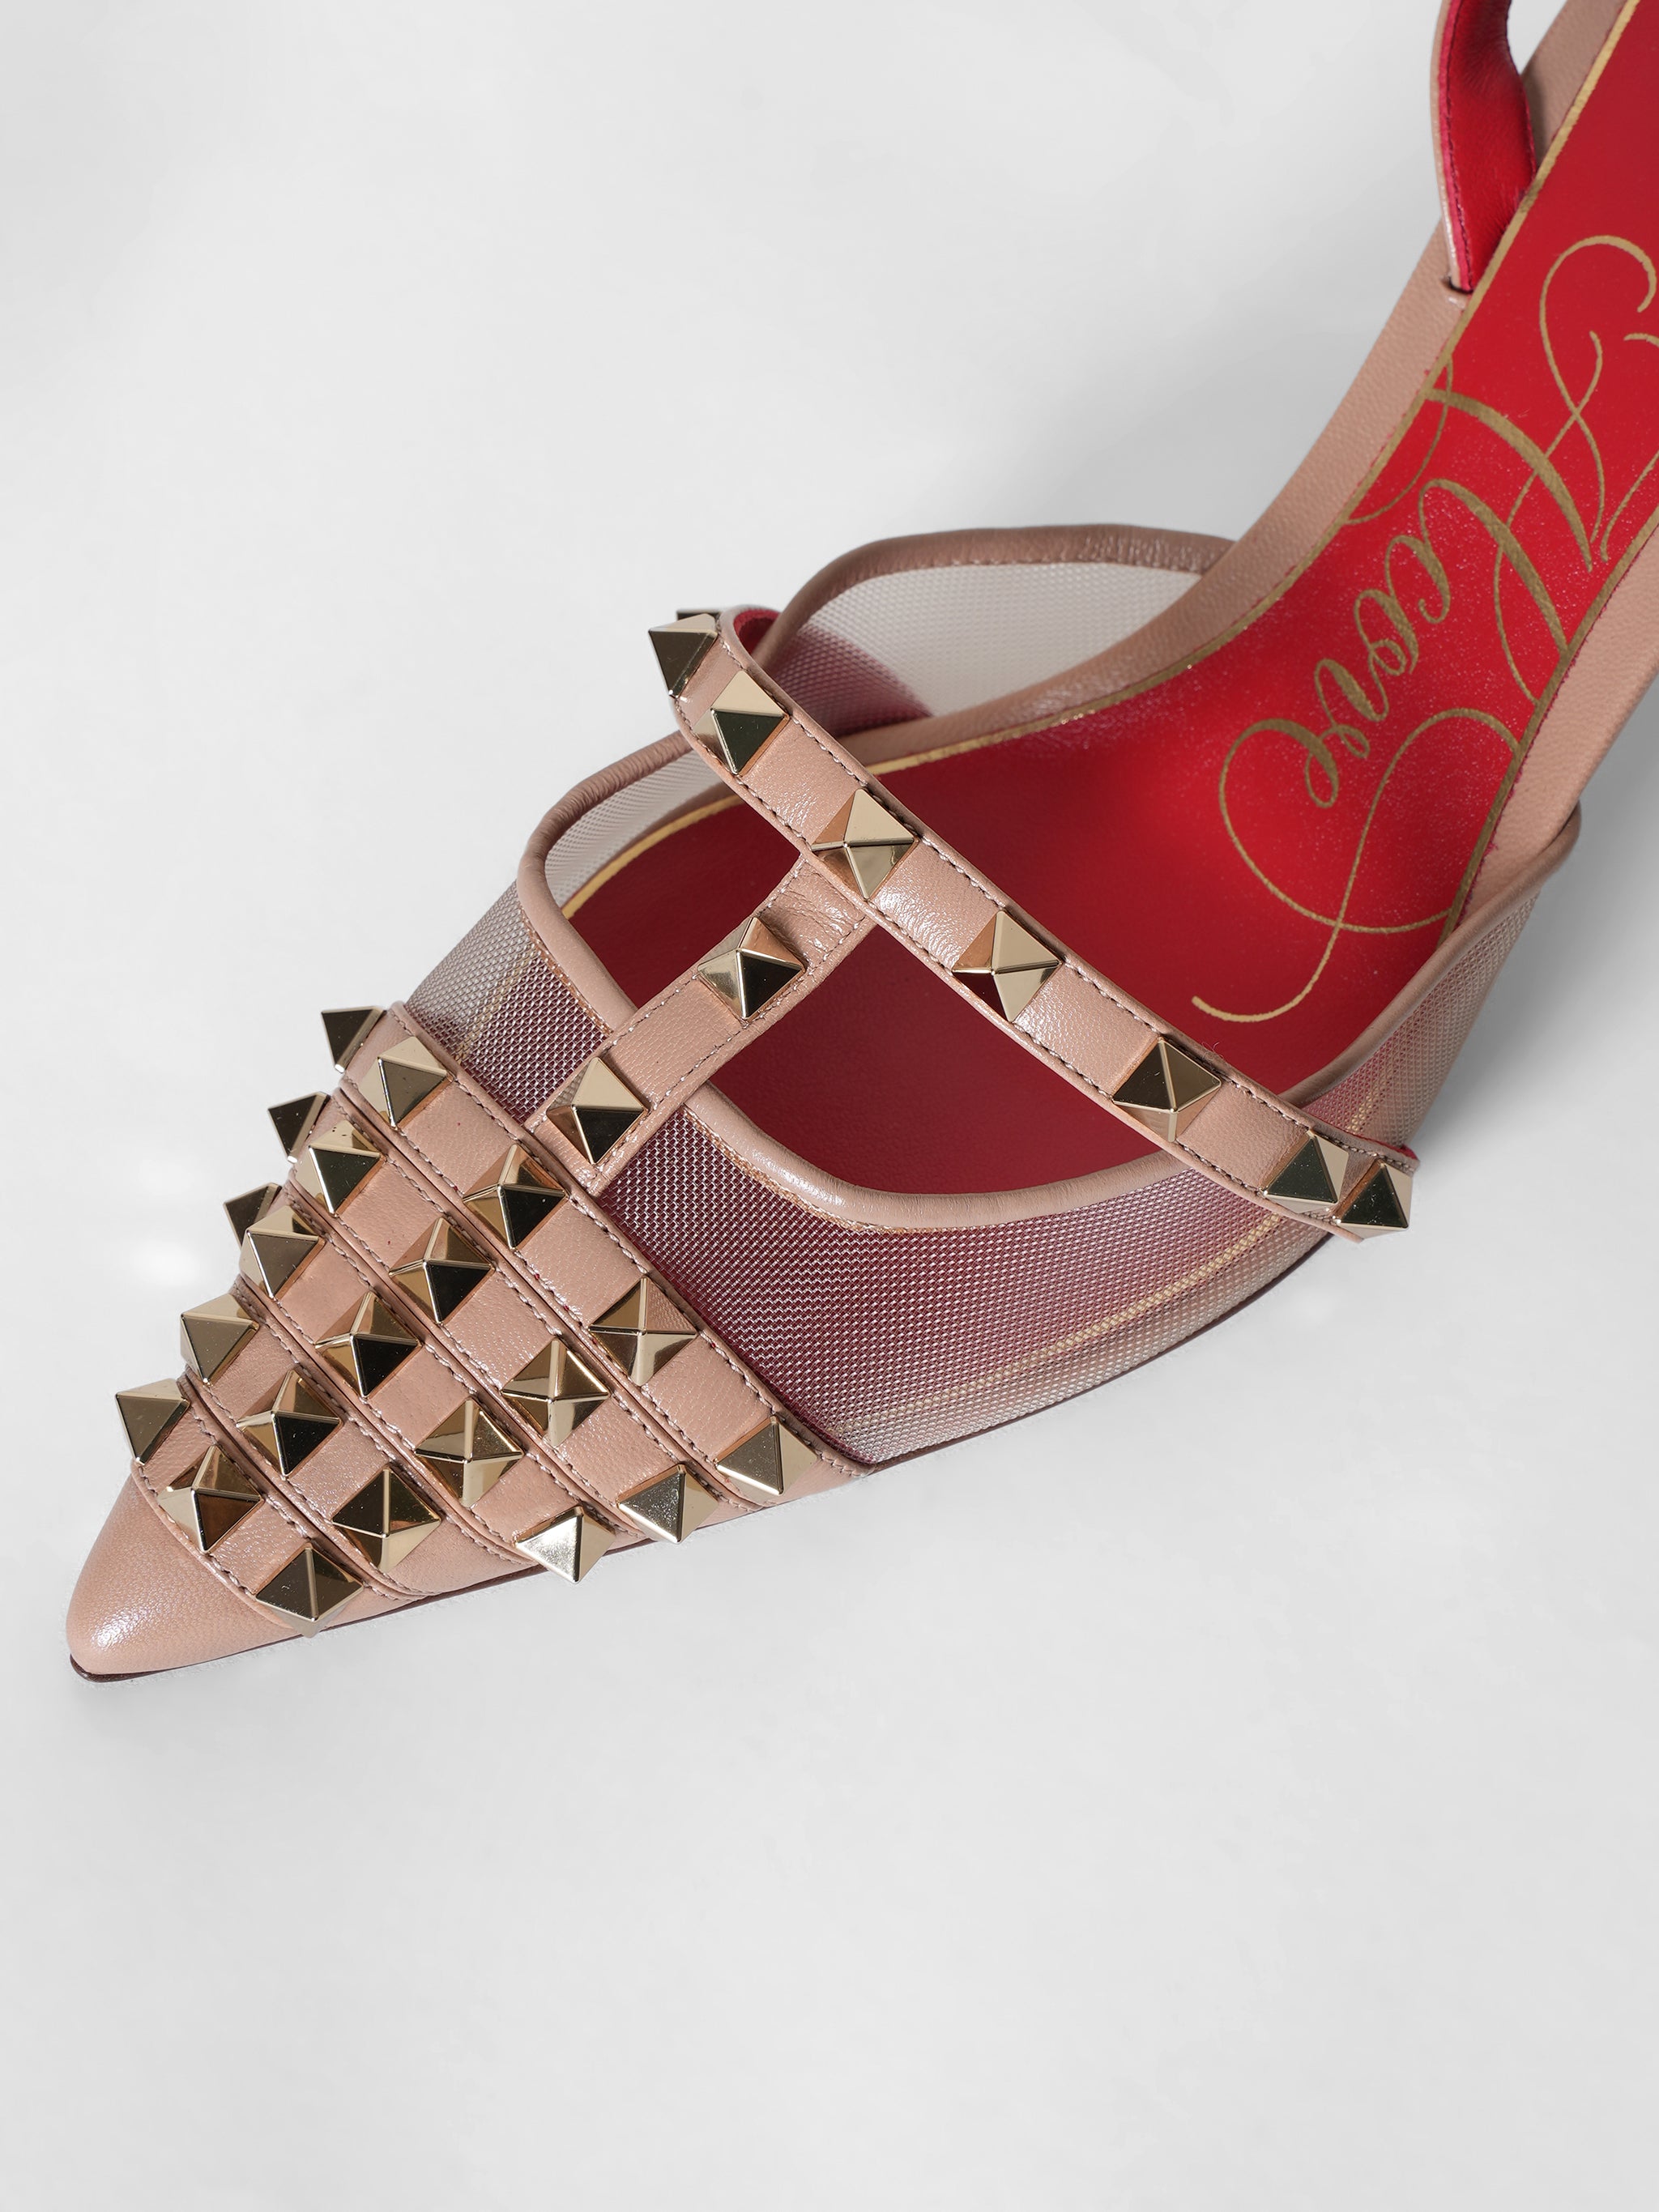 Valentino's Sales Have Doubled, Thanks to Rockstud Shoes - Racked